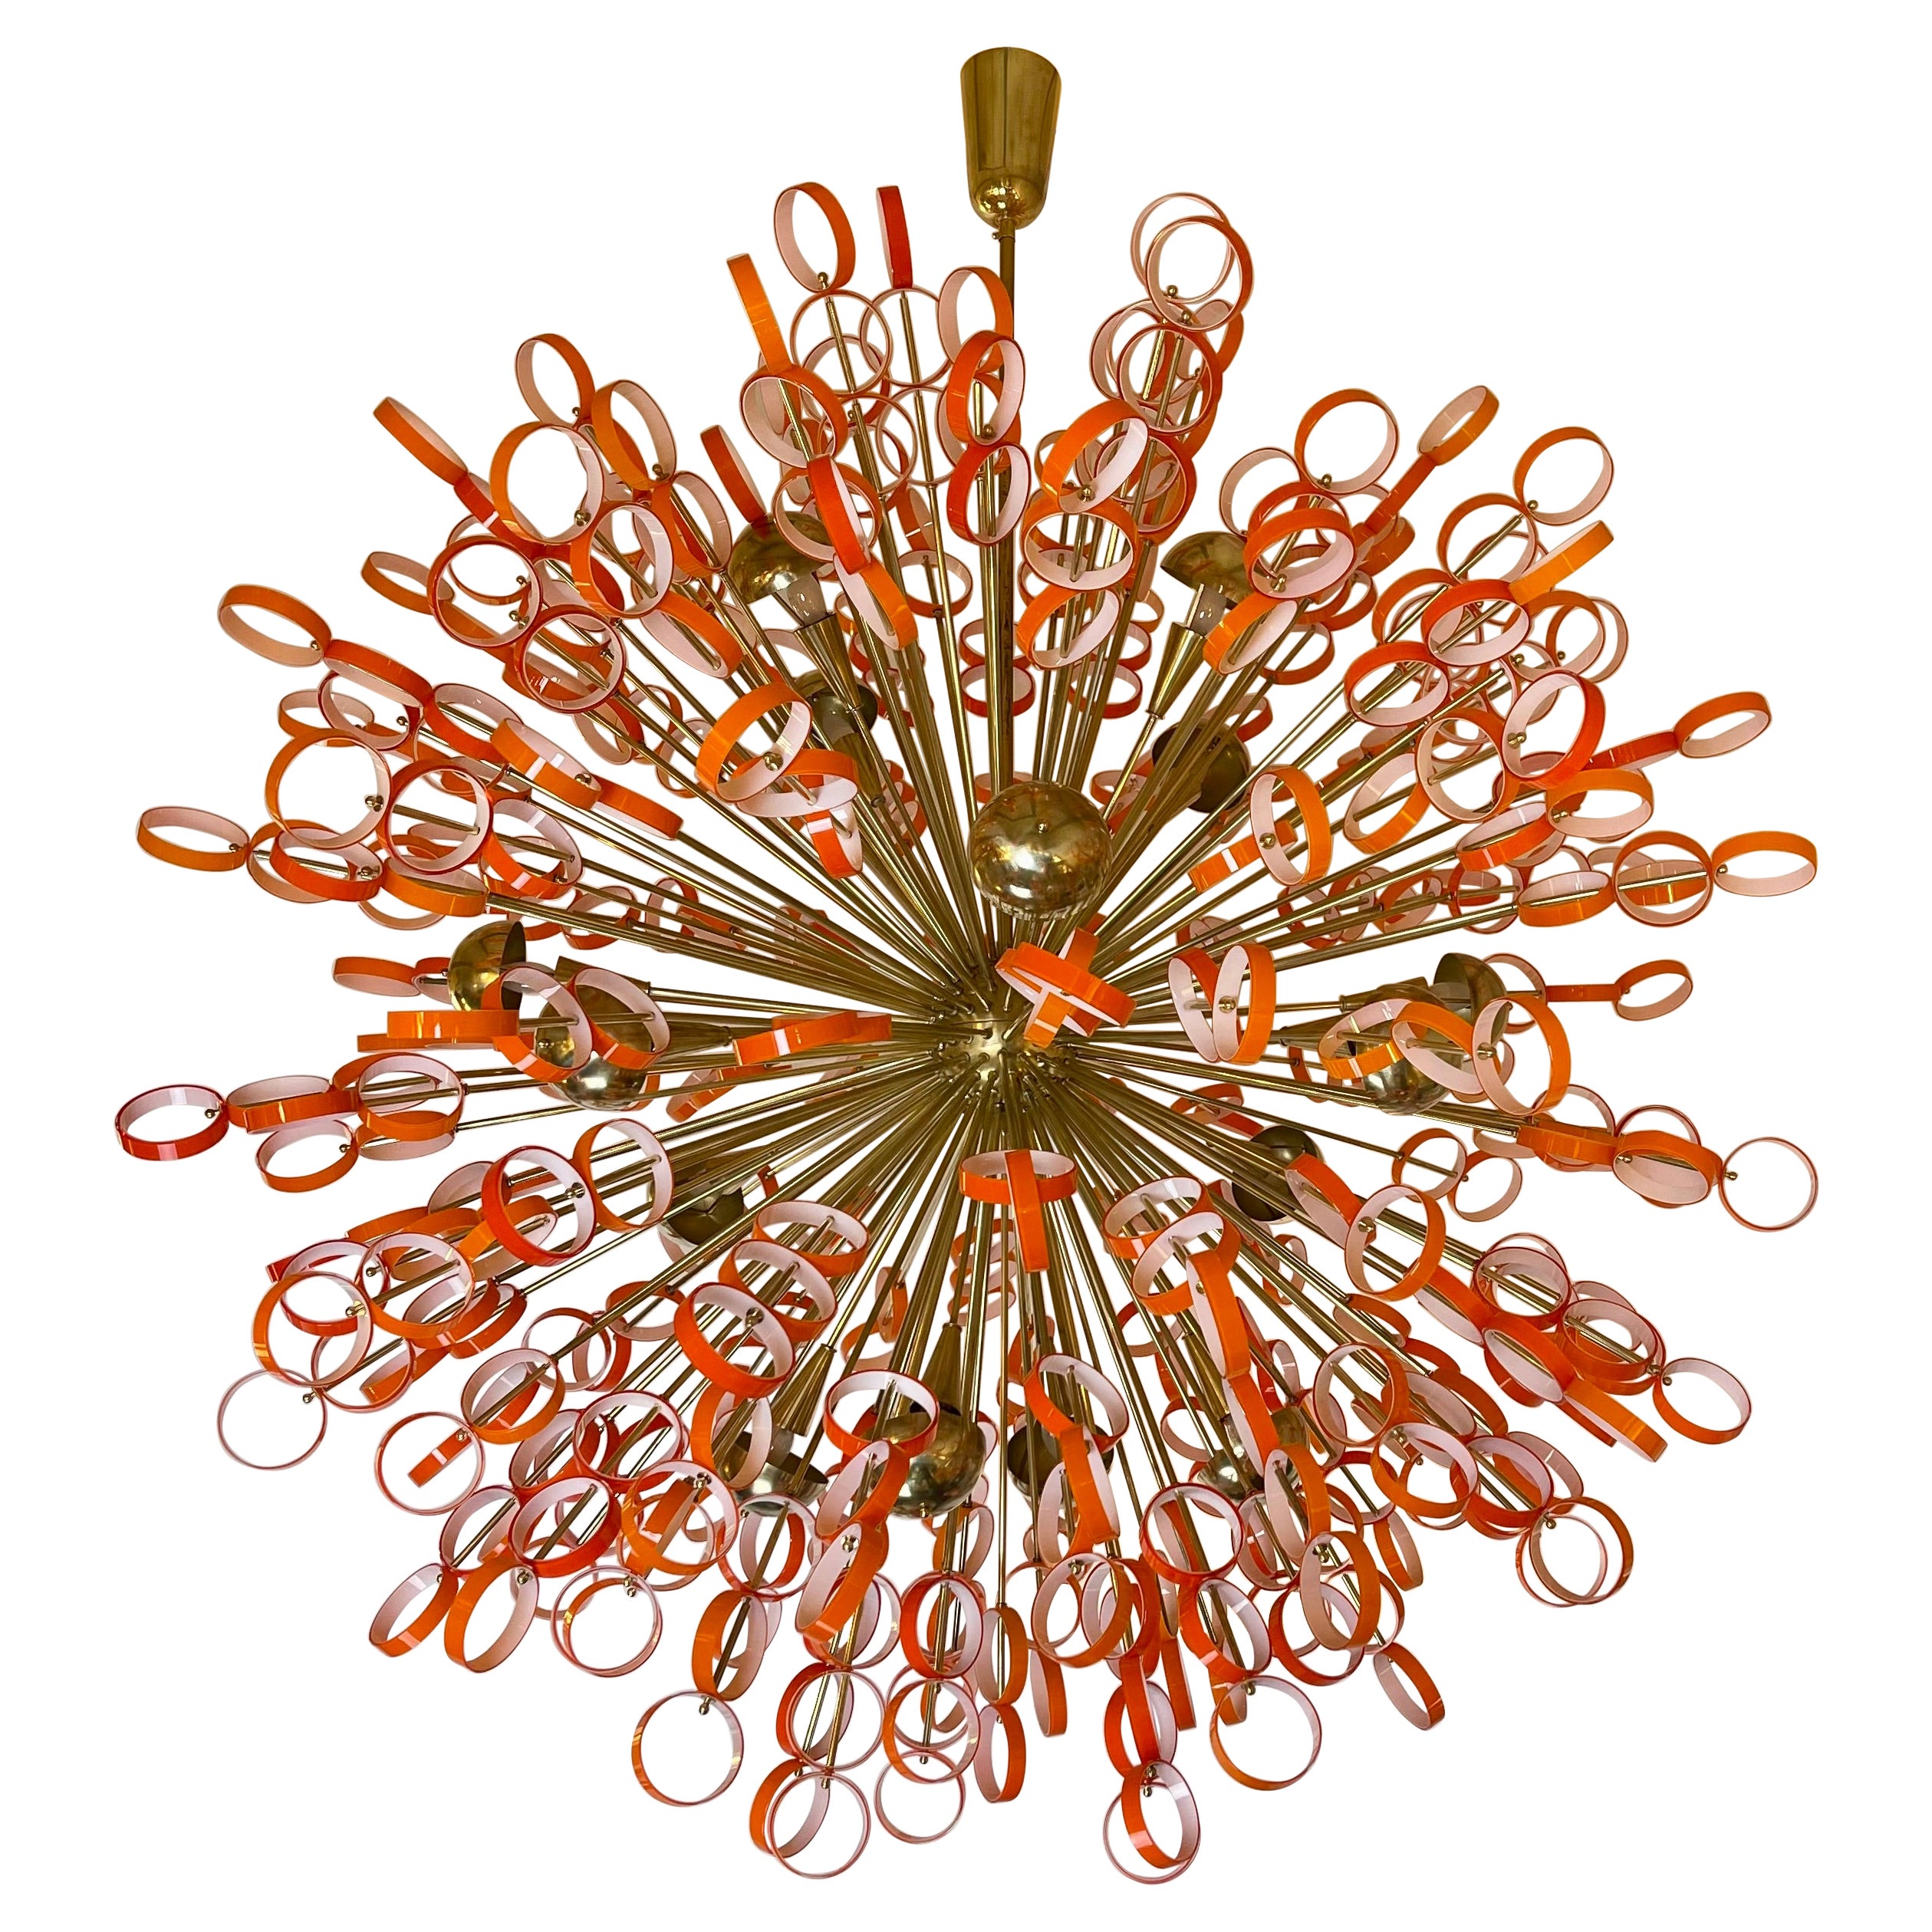 Late 20th Century Sputnik Chandelier in Jacketed Orange & White Glass by Vistosi For Sale